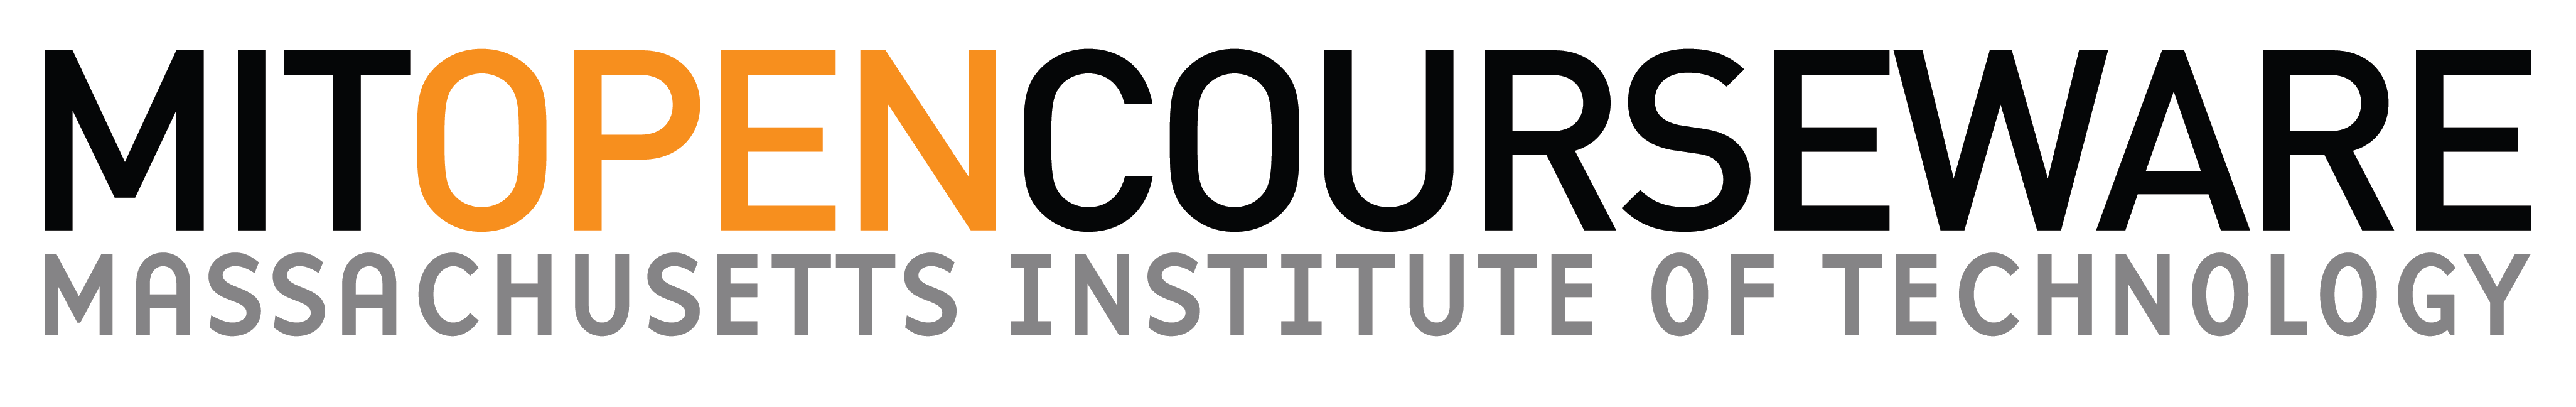 MIT OpenCourseWare official logo